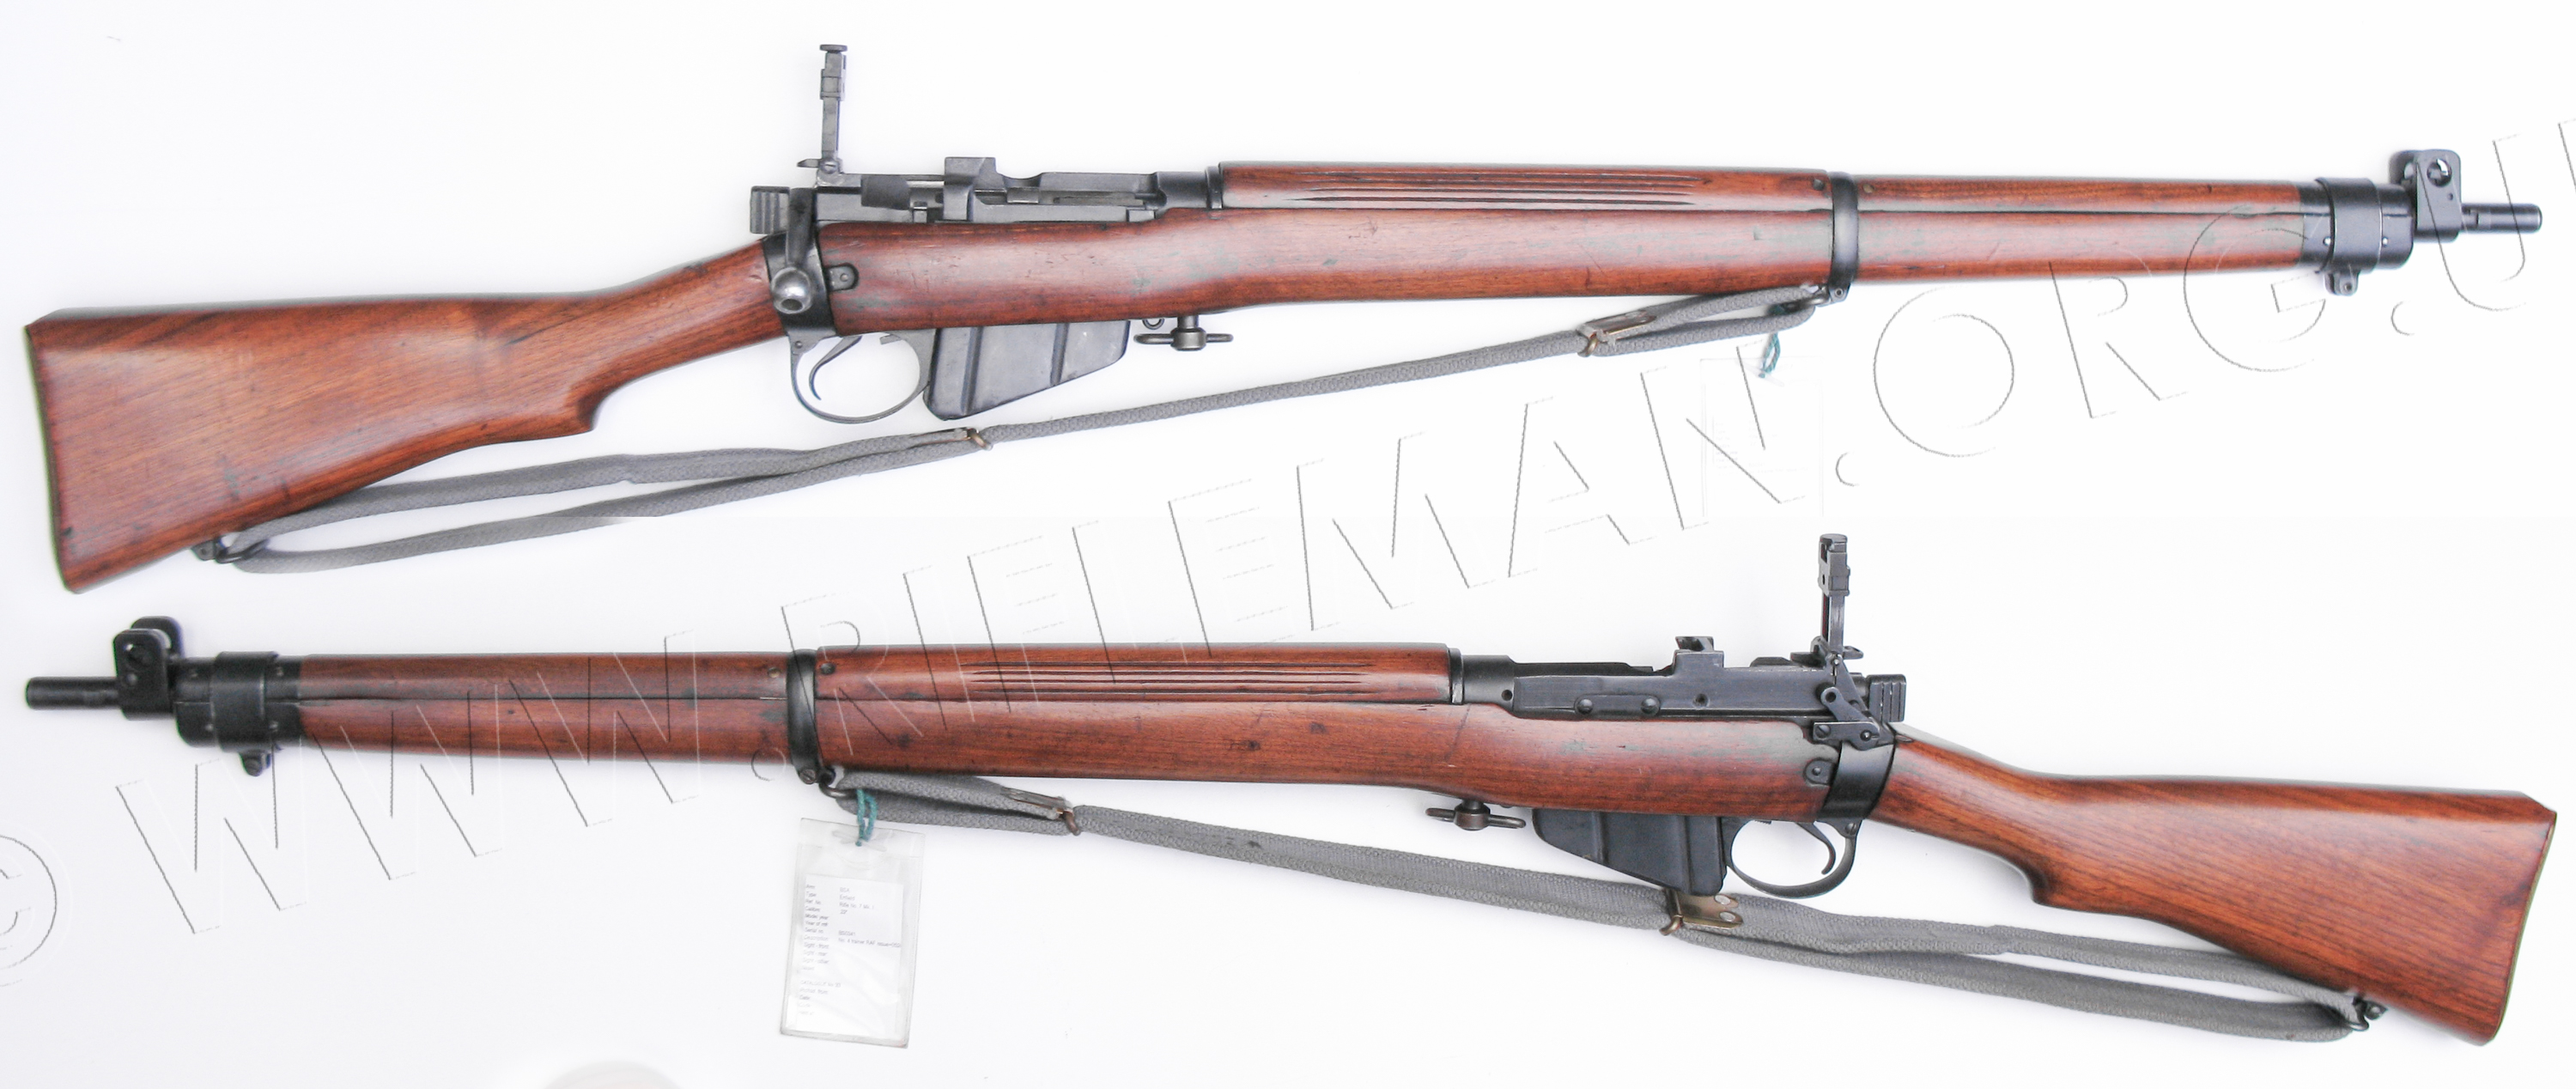 The Lee-Enfield Rifle No.7 (British) for the Royal Air Force